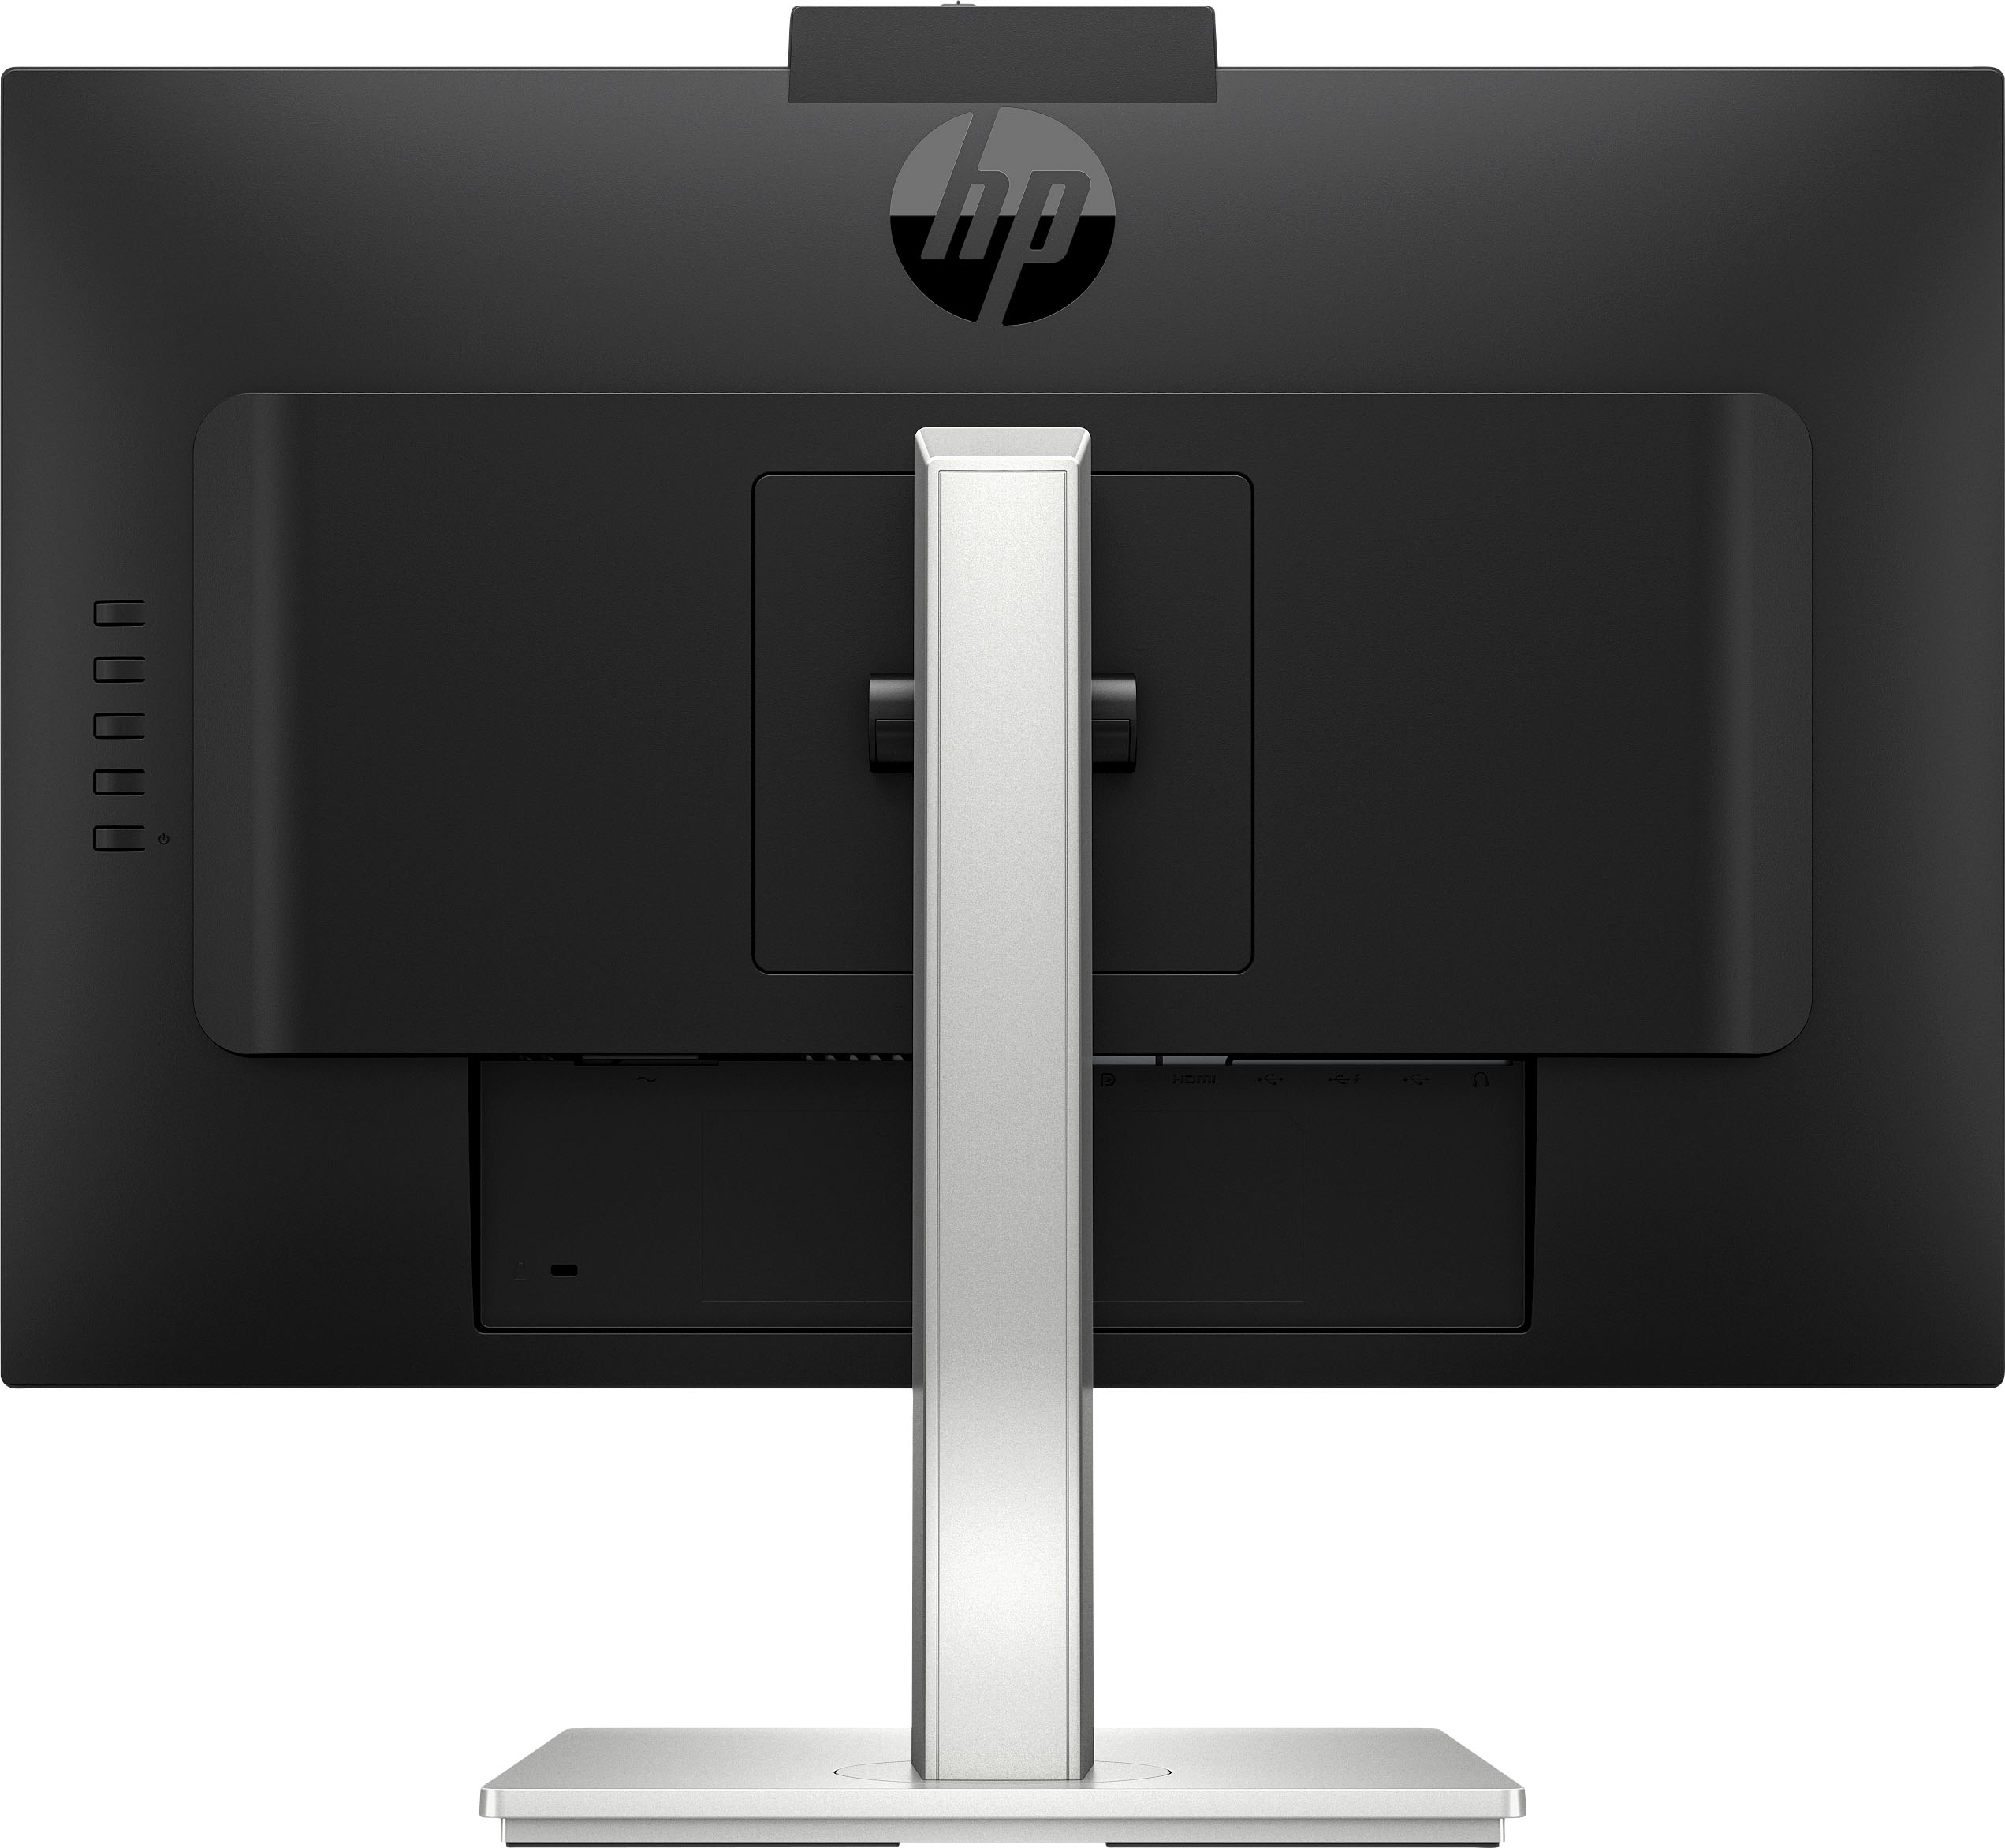 Back View: HP - M24 24" IPS FHD FreeSync Webcam Monitor (HDMI, DisplayPort, USB C, USB A, Audio-Out) - Natural Silver and Jet Black